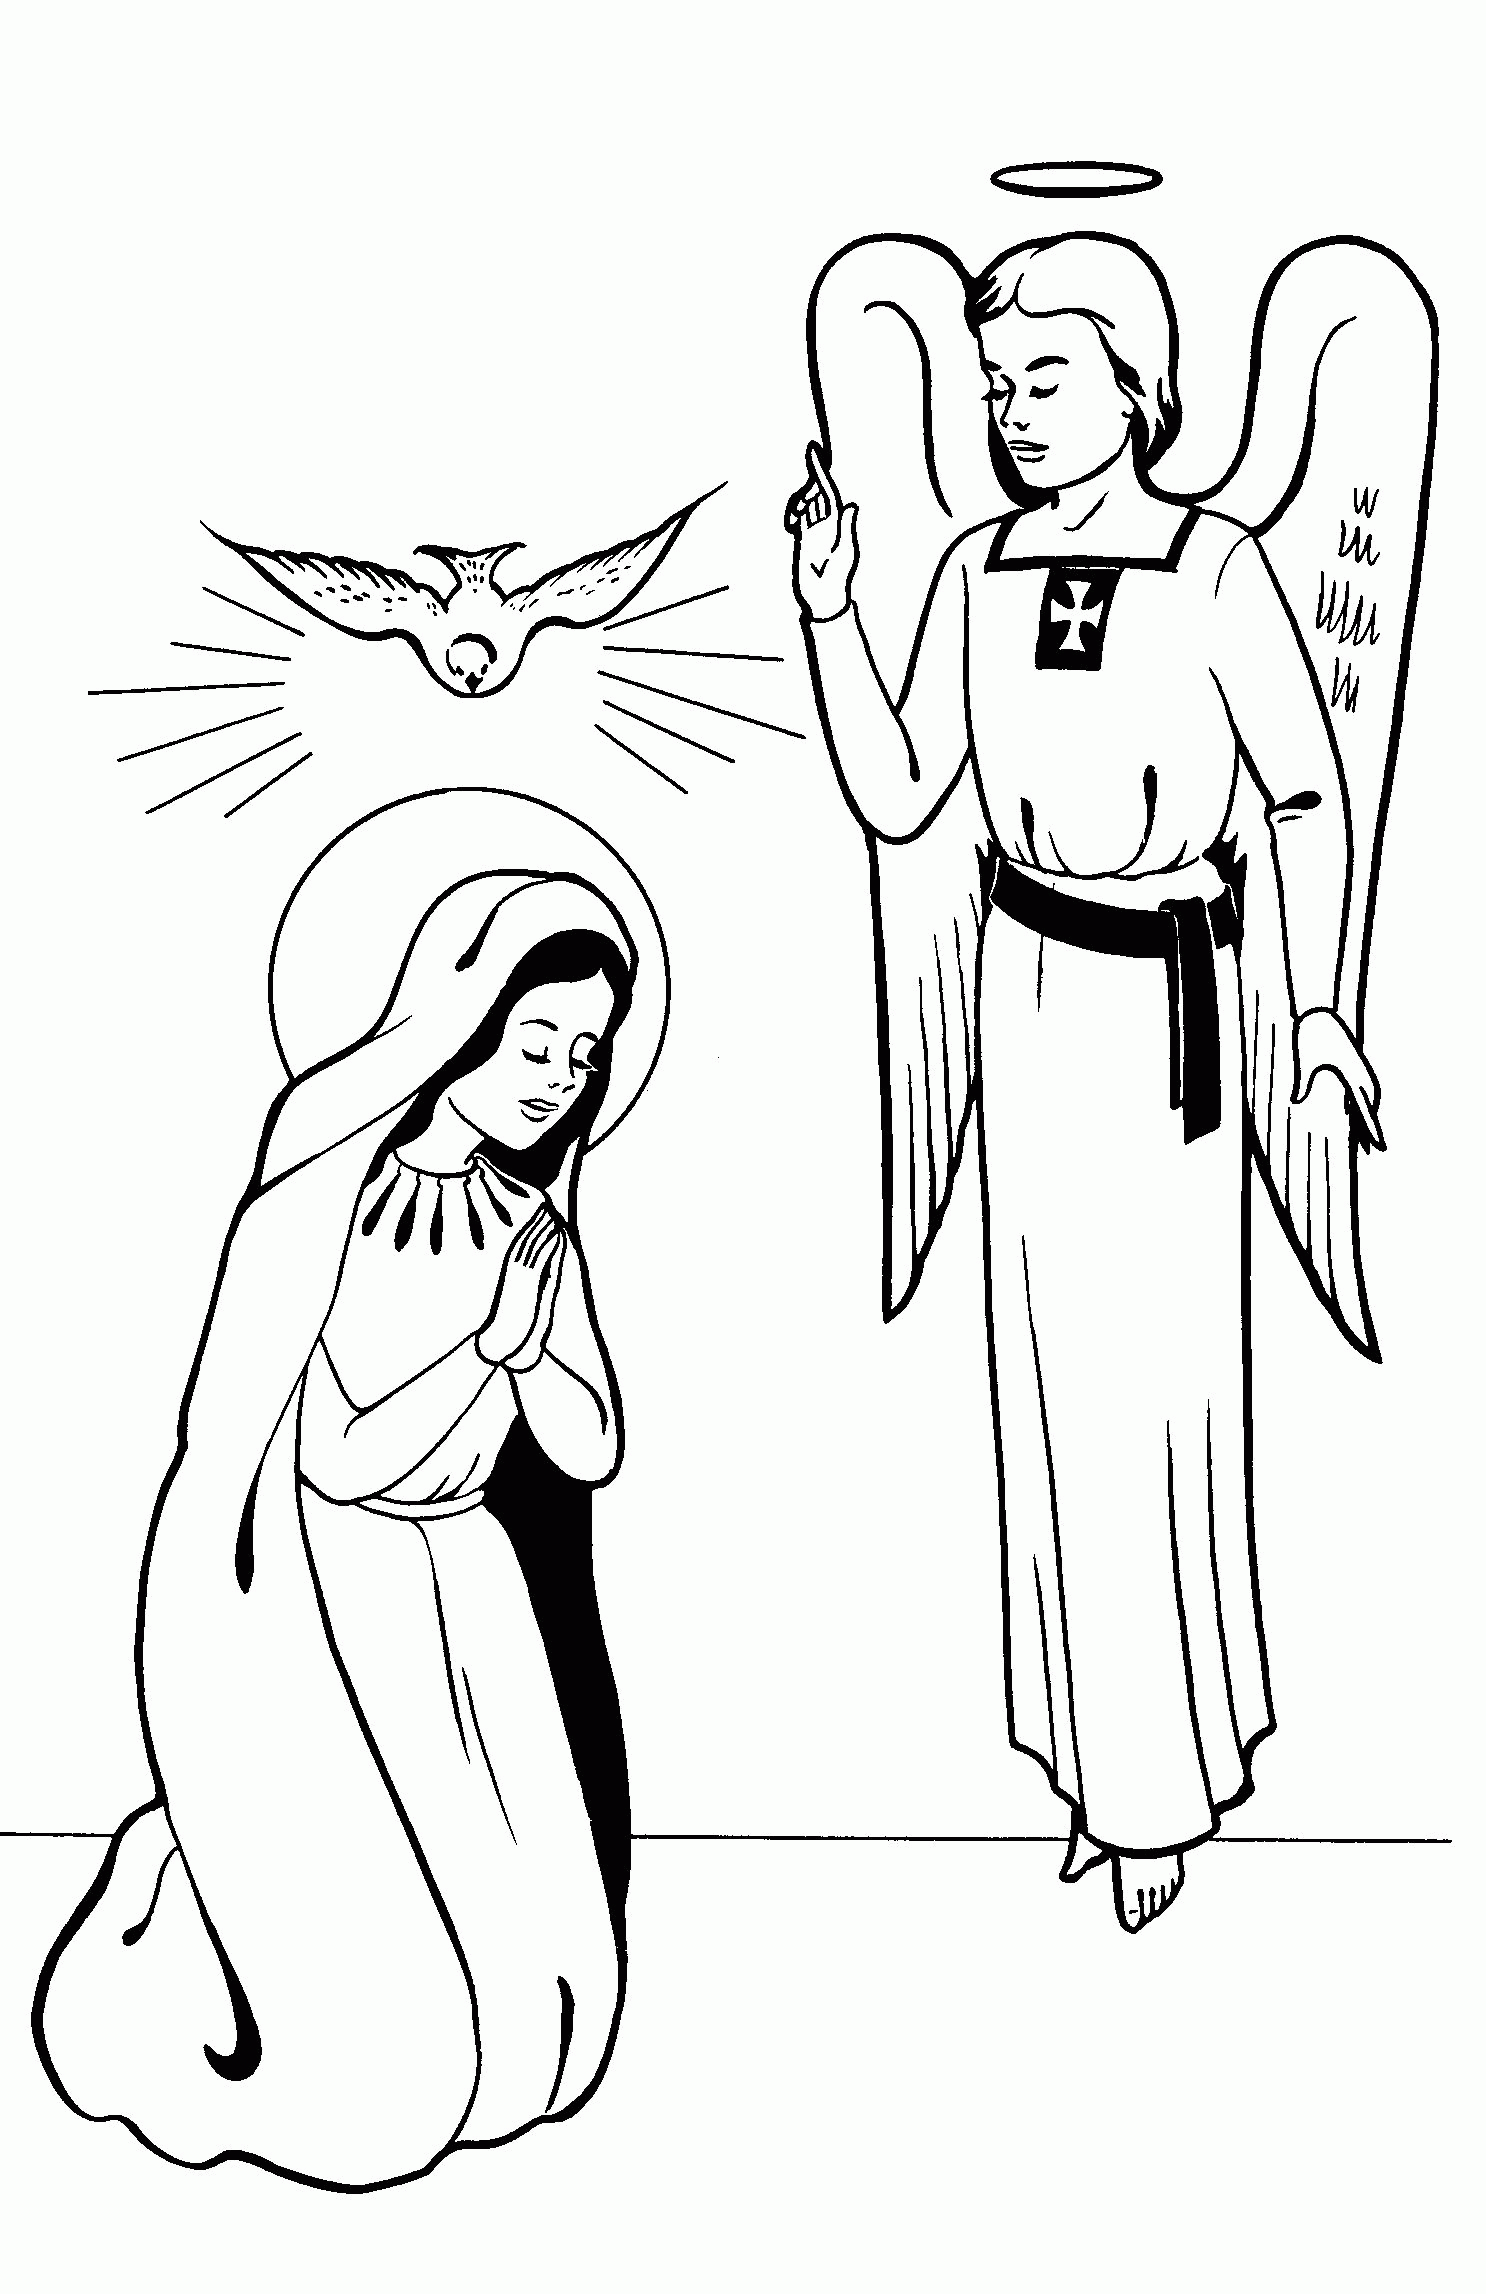 ash wednesday coloring pages ash wednesday coloring page coloring home wednesday pages ash coloring 